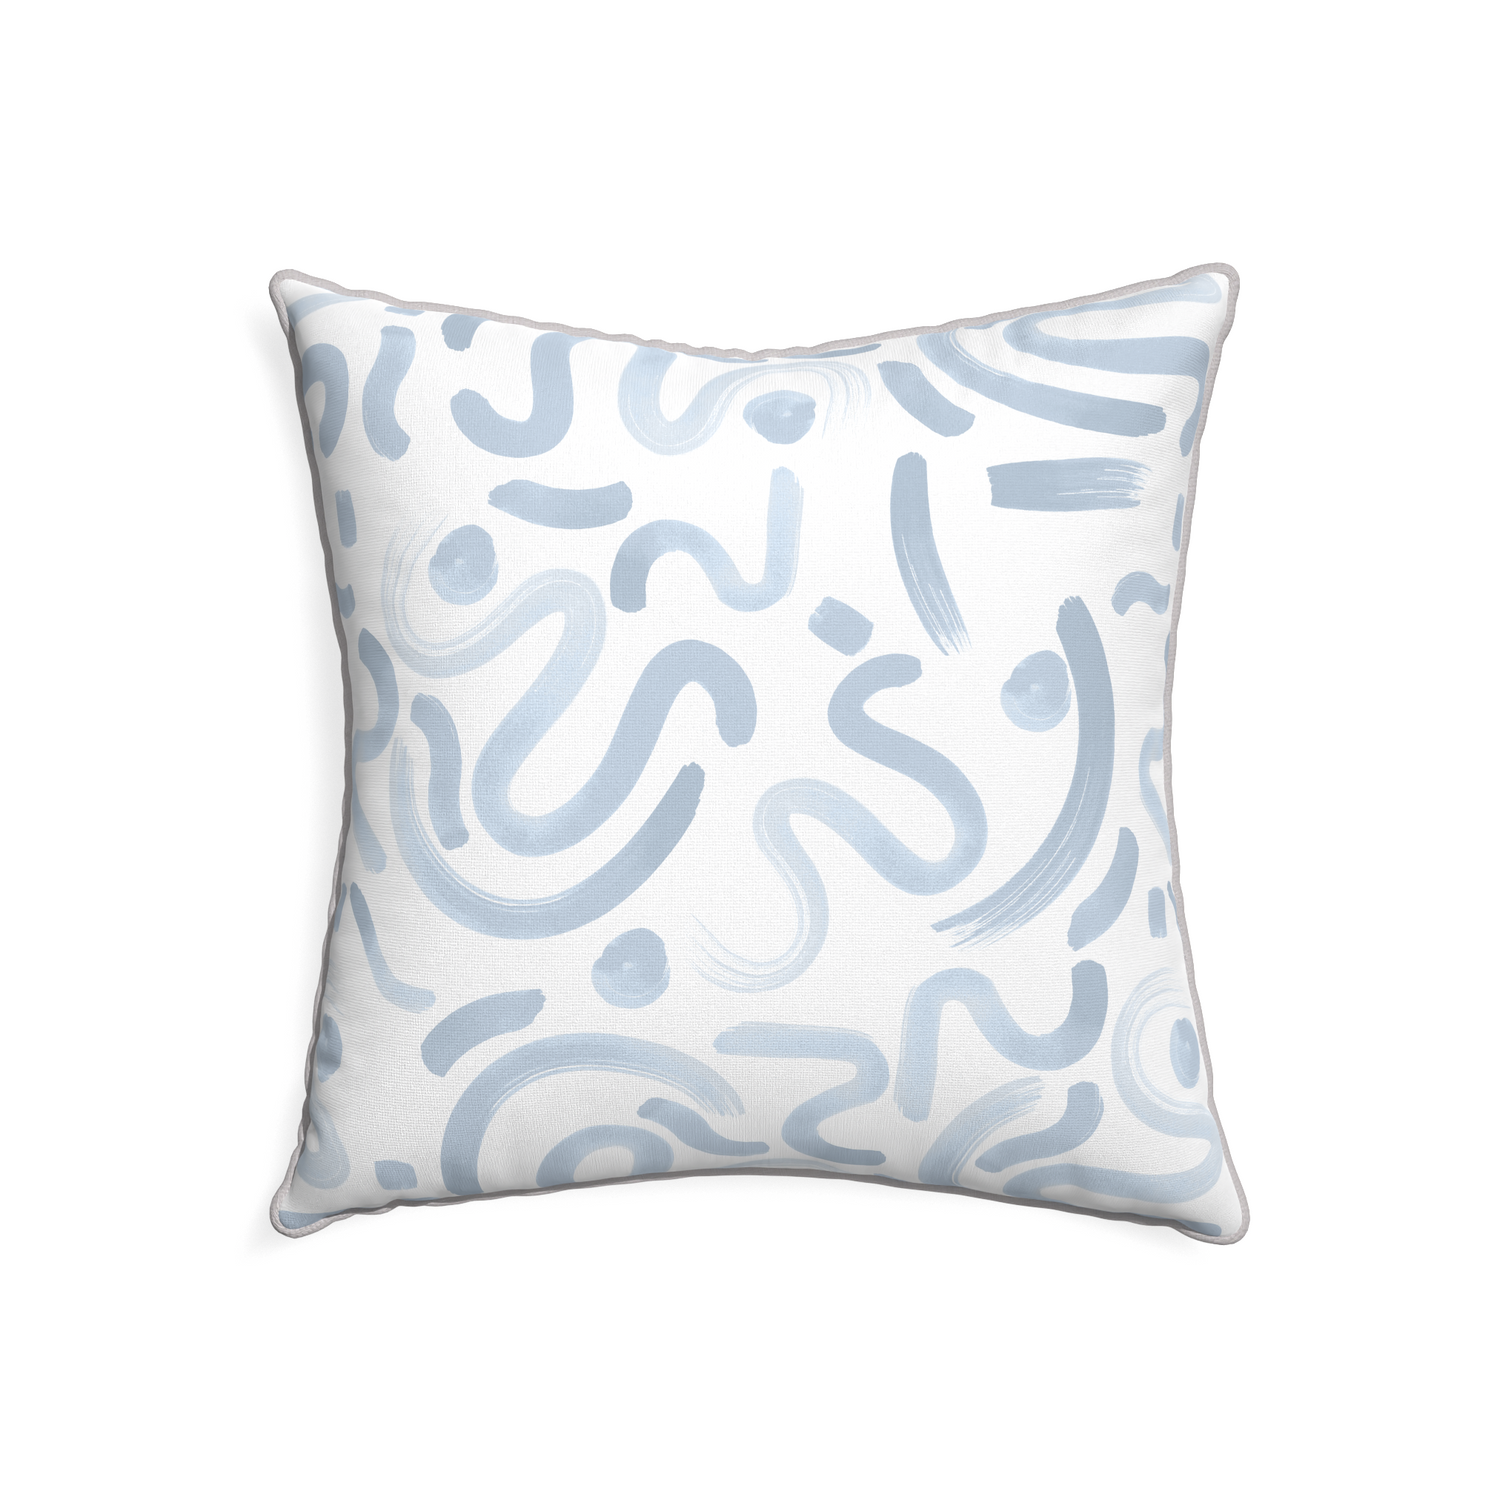 22-square hockney sky custom pillow with pebble piping on white background